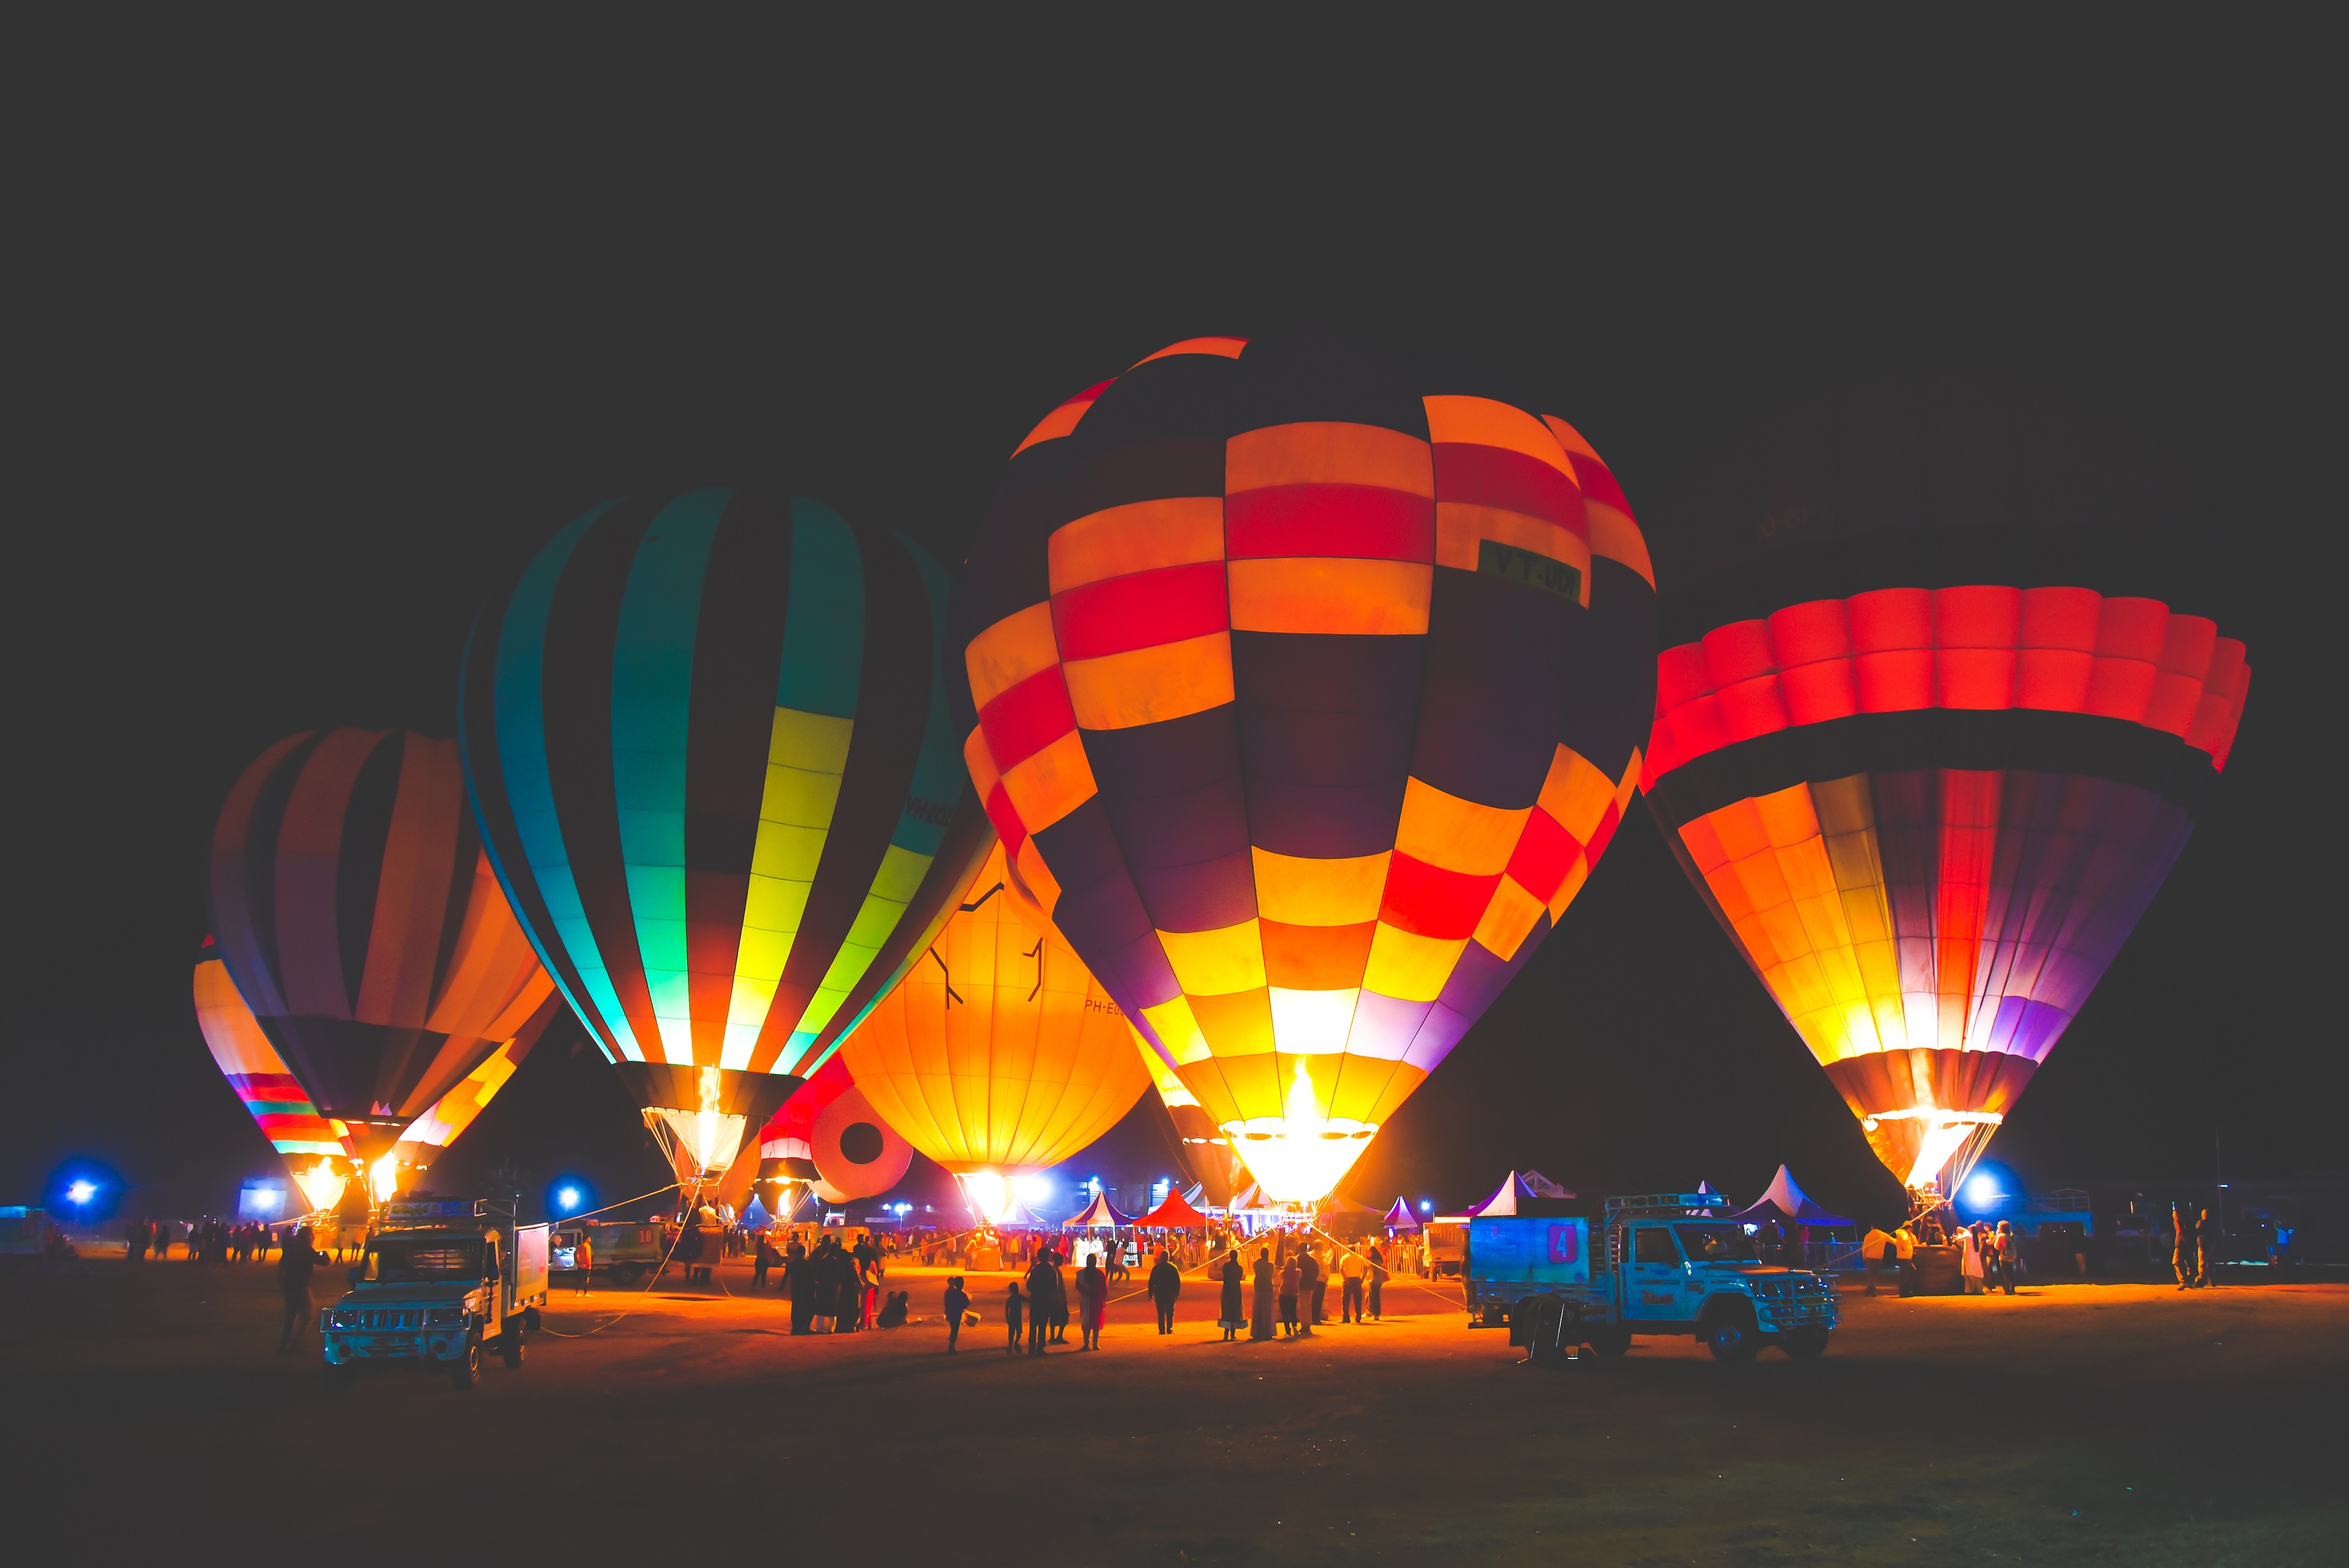 The Megahlayan Age Fest Hot air Balloon Ride